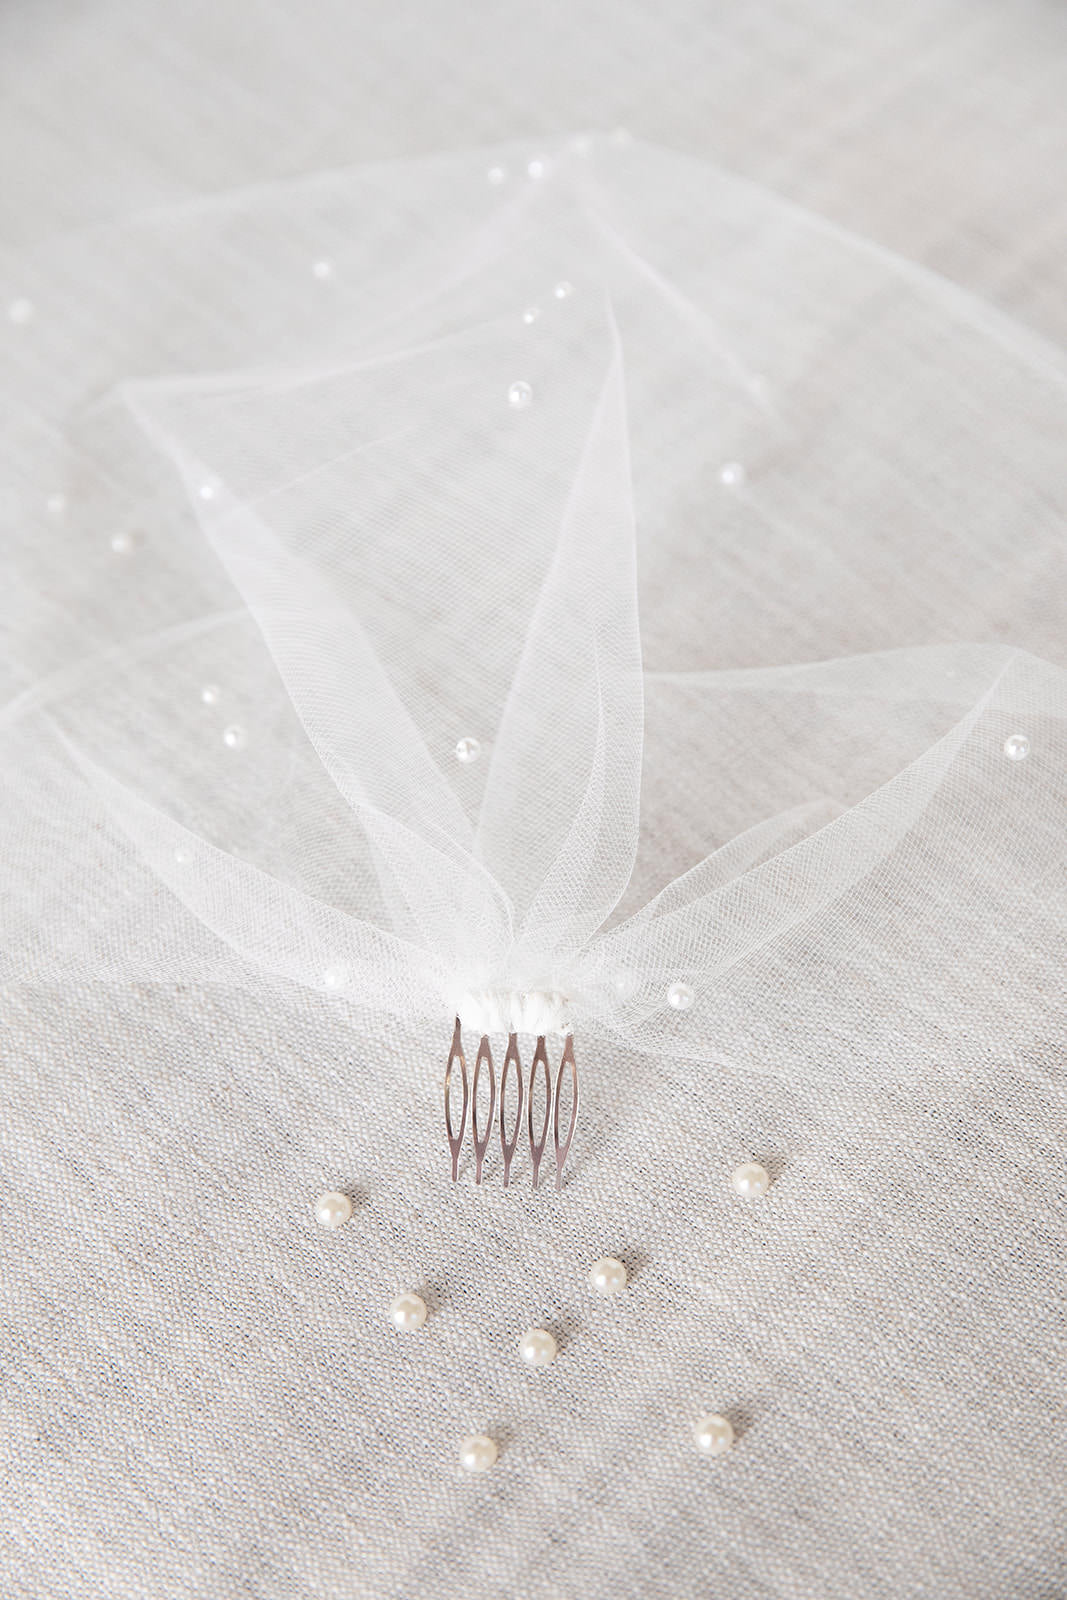 birdcage wedding veil with pearls attached to hair comb